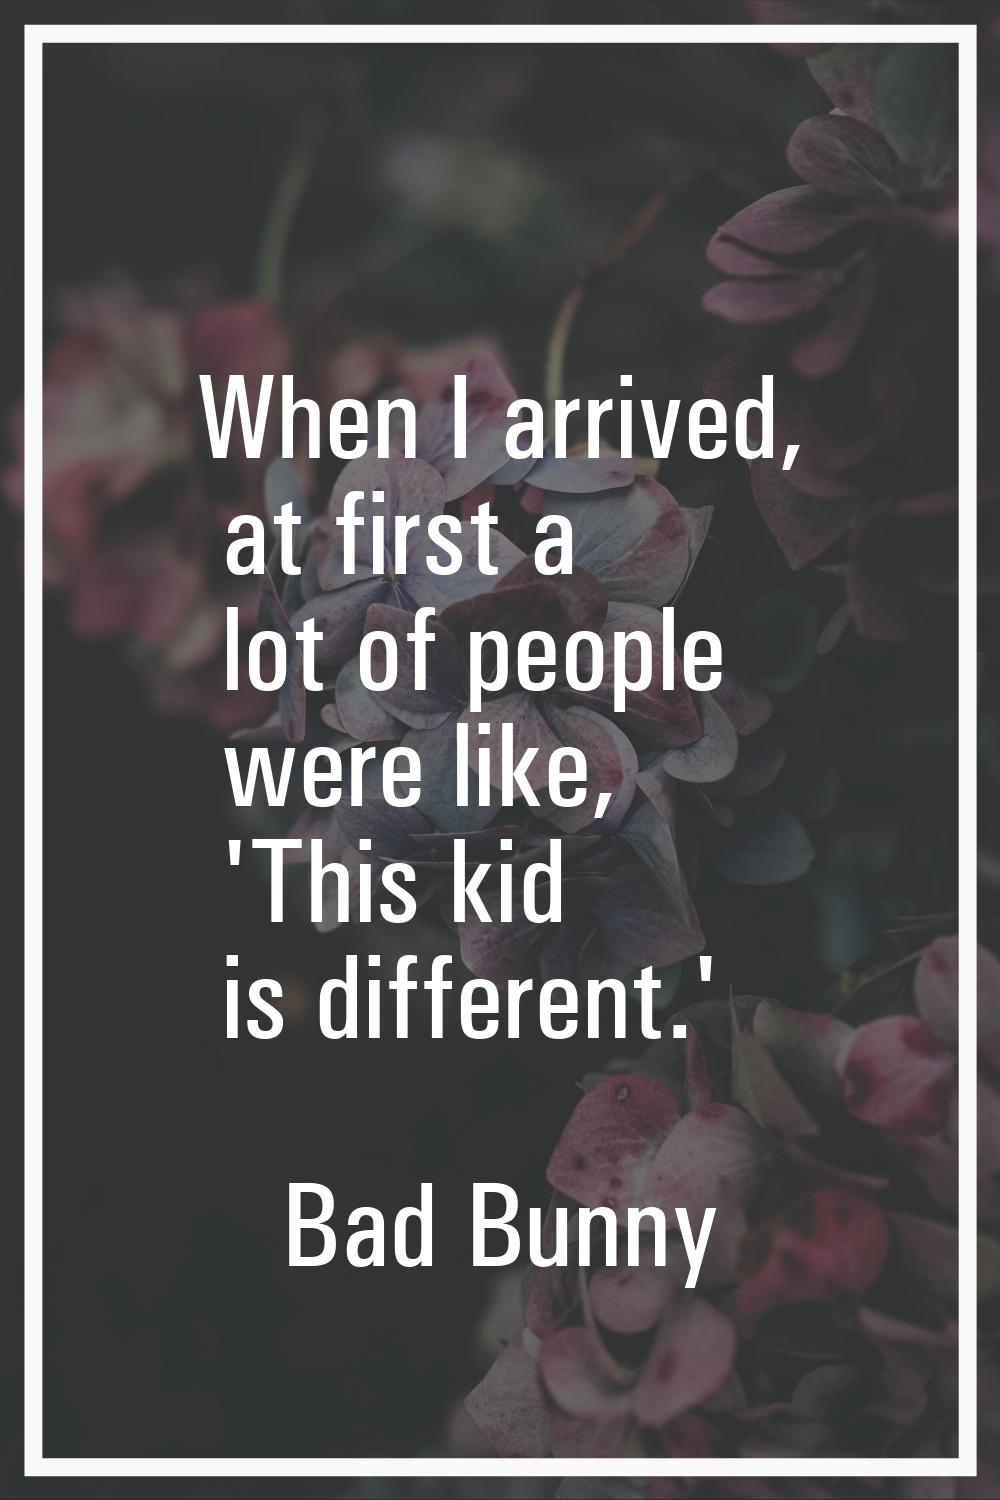 When I arrived, at first a lot of people were like, 'This kid is different.'